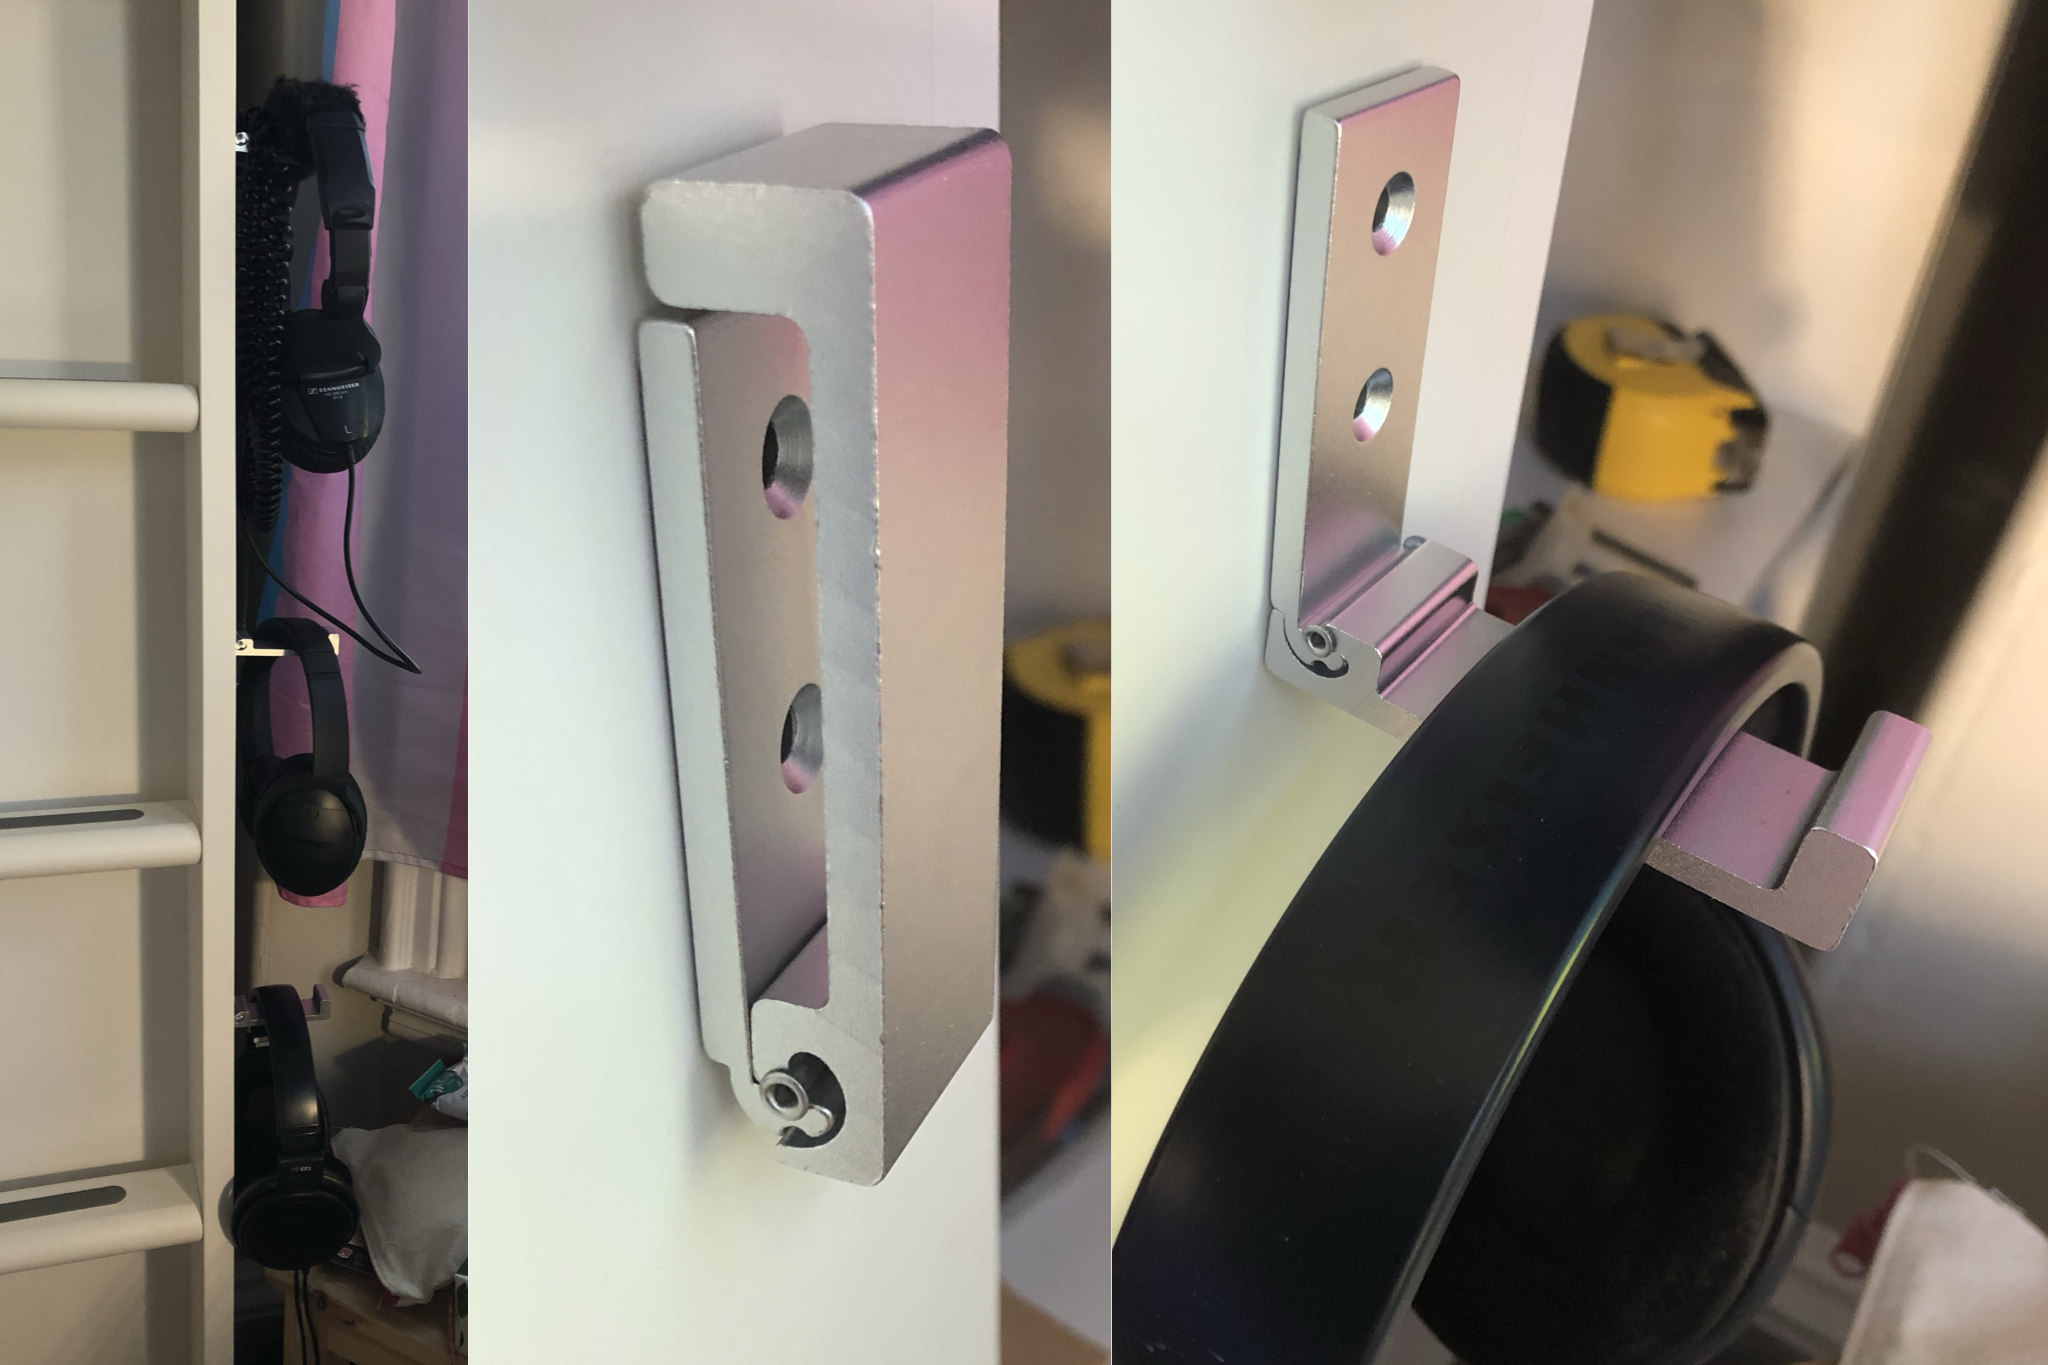 headphone hooks, folded and unfolded, and with headphones hanging from them